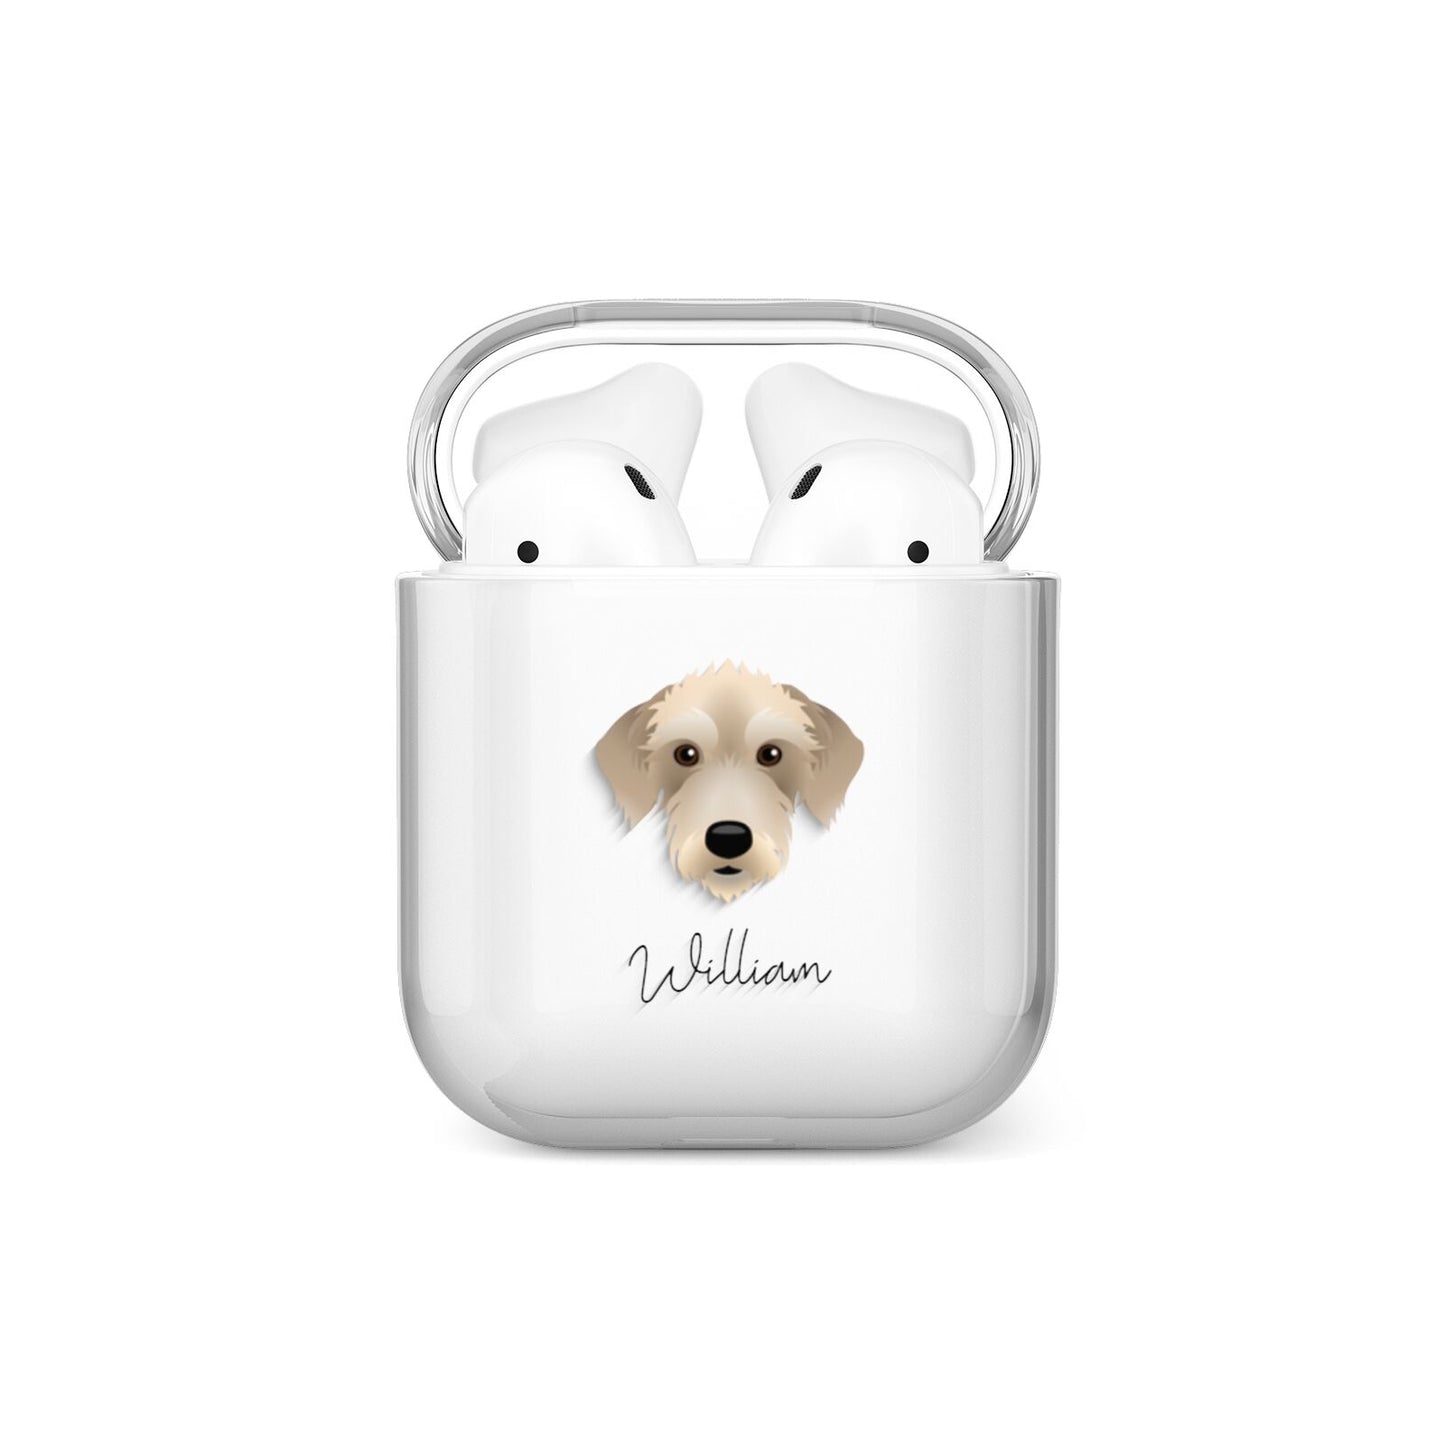 Bedlington Whippet Personalised AirPods Case